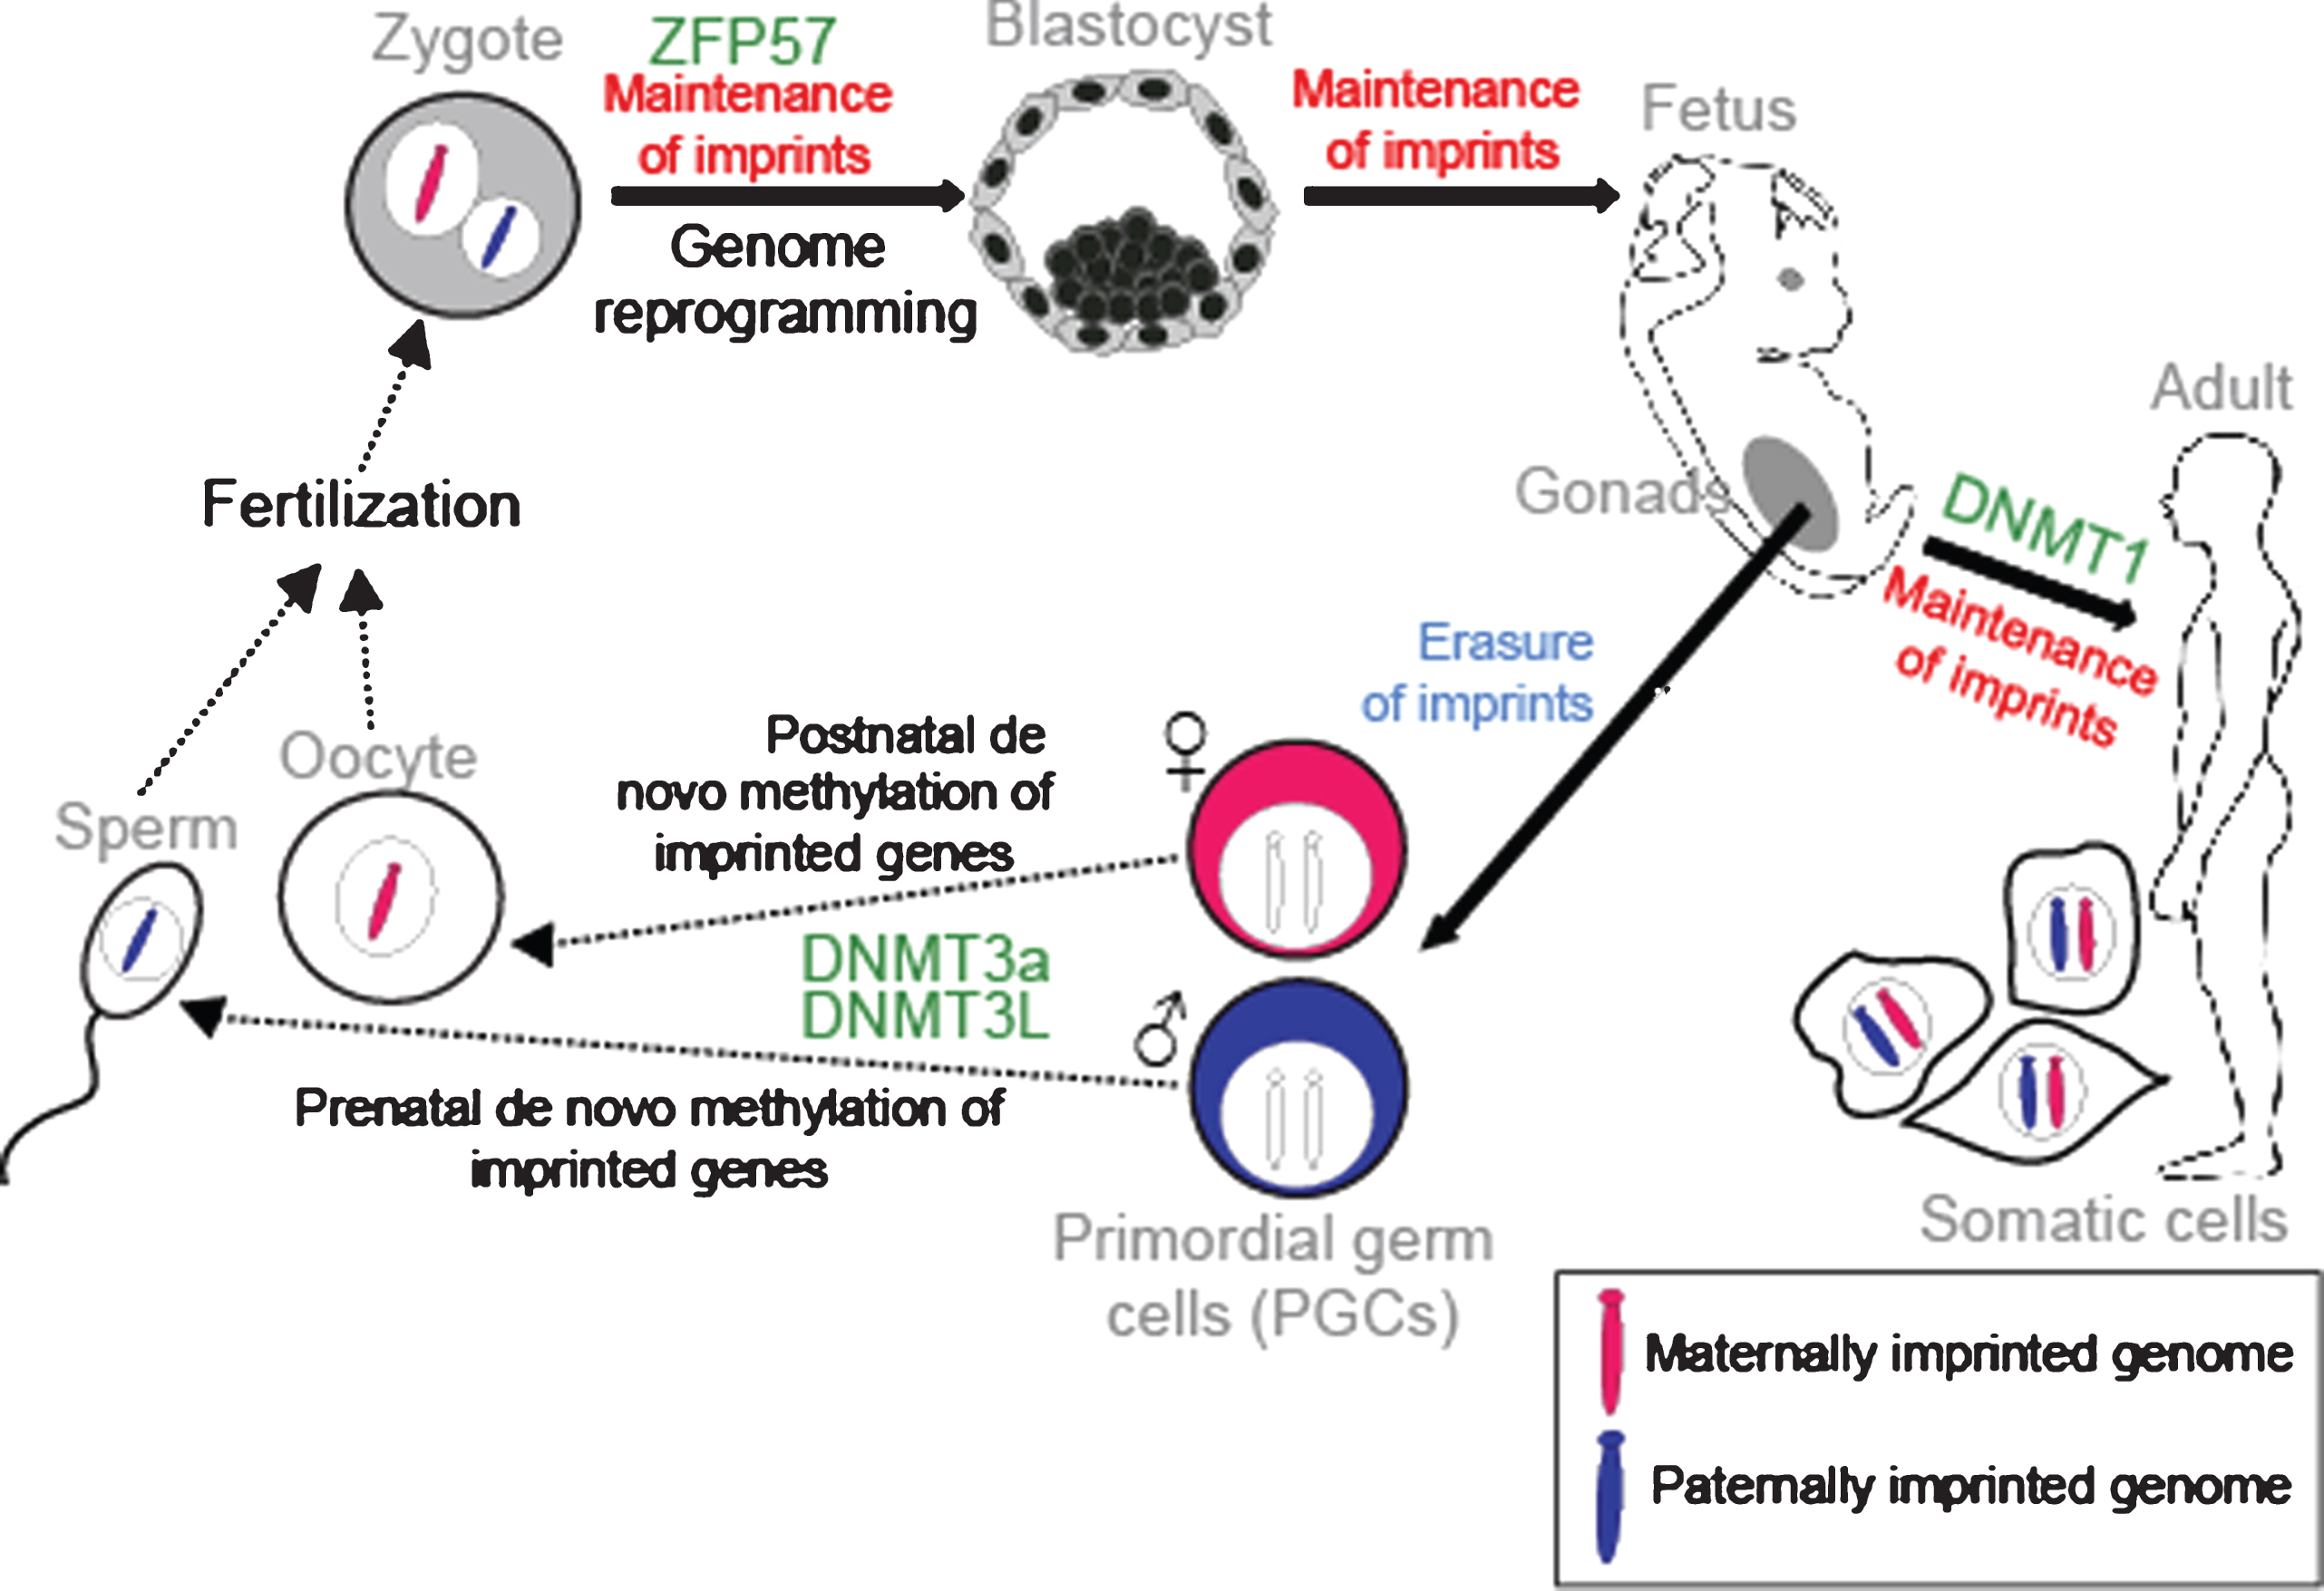 Establishment and maintenance of imprints during development. DNA methylation is erased in PGCs in the genital ridge. However, imprints are maintained in somatic cells throughout the organism’s lifetime. Imprints are acquired in a sex-specific manner in the germline: maternally and paternally-methylated ICRs gain DNA methylation in oocytes and sperm respectively for transmission to the next generation. Following fertilisation, the parental-specific imprints are maintained in the developing organism despite genome-wide reprogramming elsewhere. ZFP57 protects imprints during the post-fertilization epigenetic reprogramming period. DNMT3a and DNMT3L catalyse the de novo methylation process and DNMT1 participates in maintaining imprints in somatic tissues.